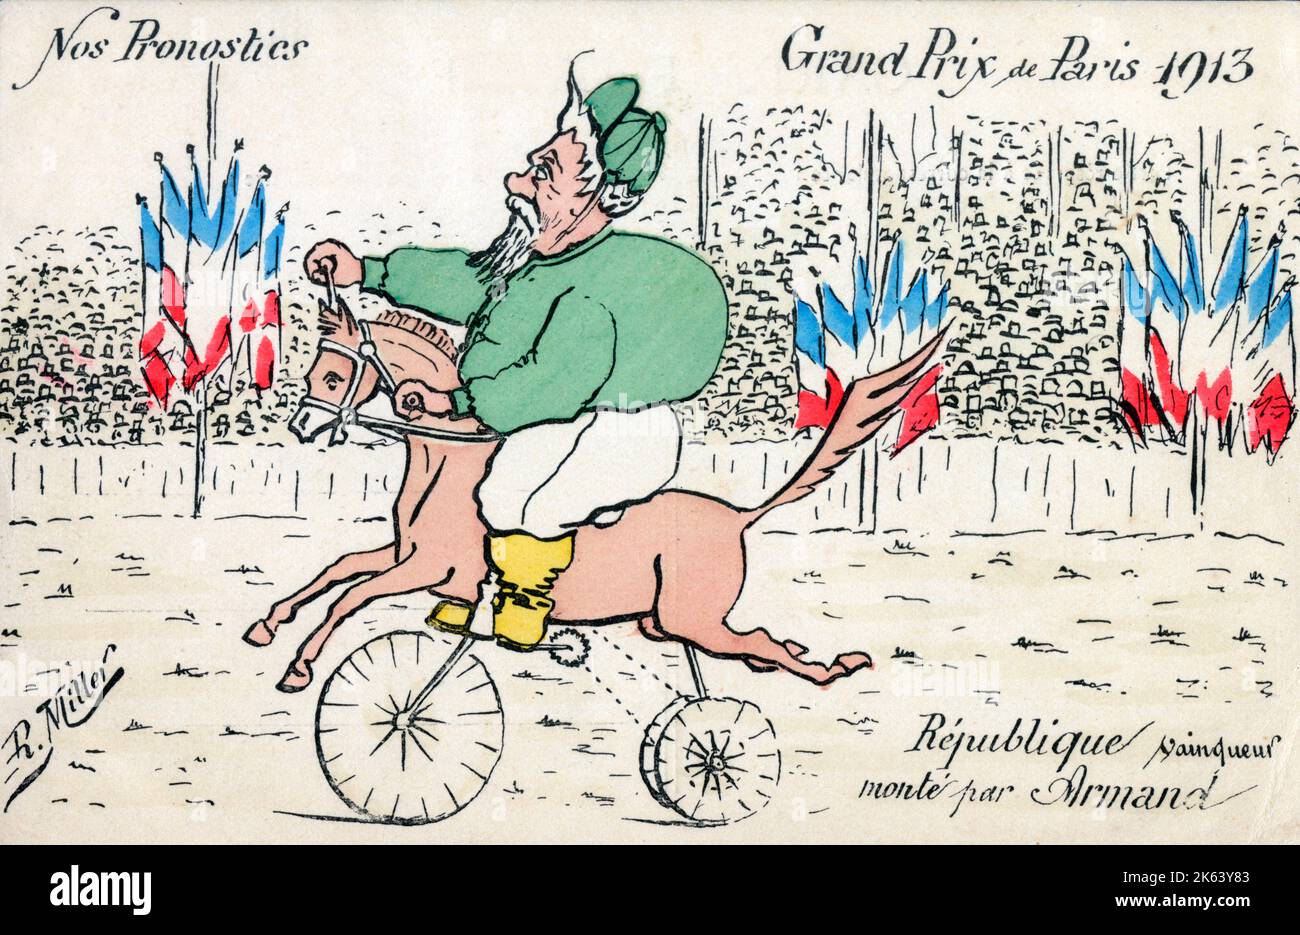 The Prediction of the 'Grand Prix of Paris of 1913' (The French General Election  -  A Republic winner ridden by Armand... Armand Fallieres (1841-1931) - President of France (between 1906-1913) - in fact, the winning candidate in the 1913 Presidential Election of 1913 was Raymond Poincare (albeit for the Republican Democratic Party). Stock Photo